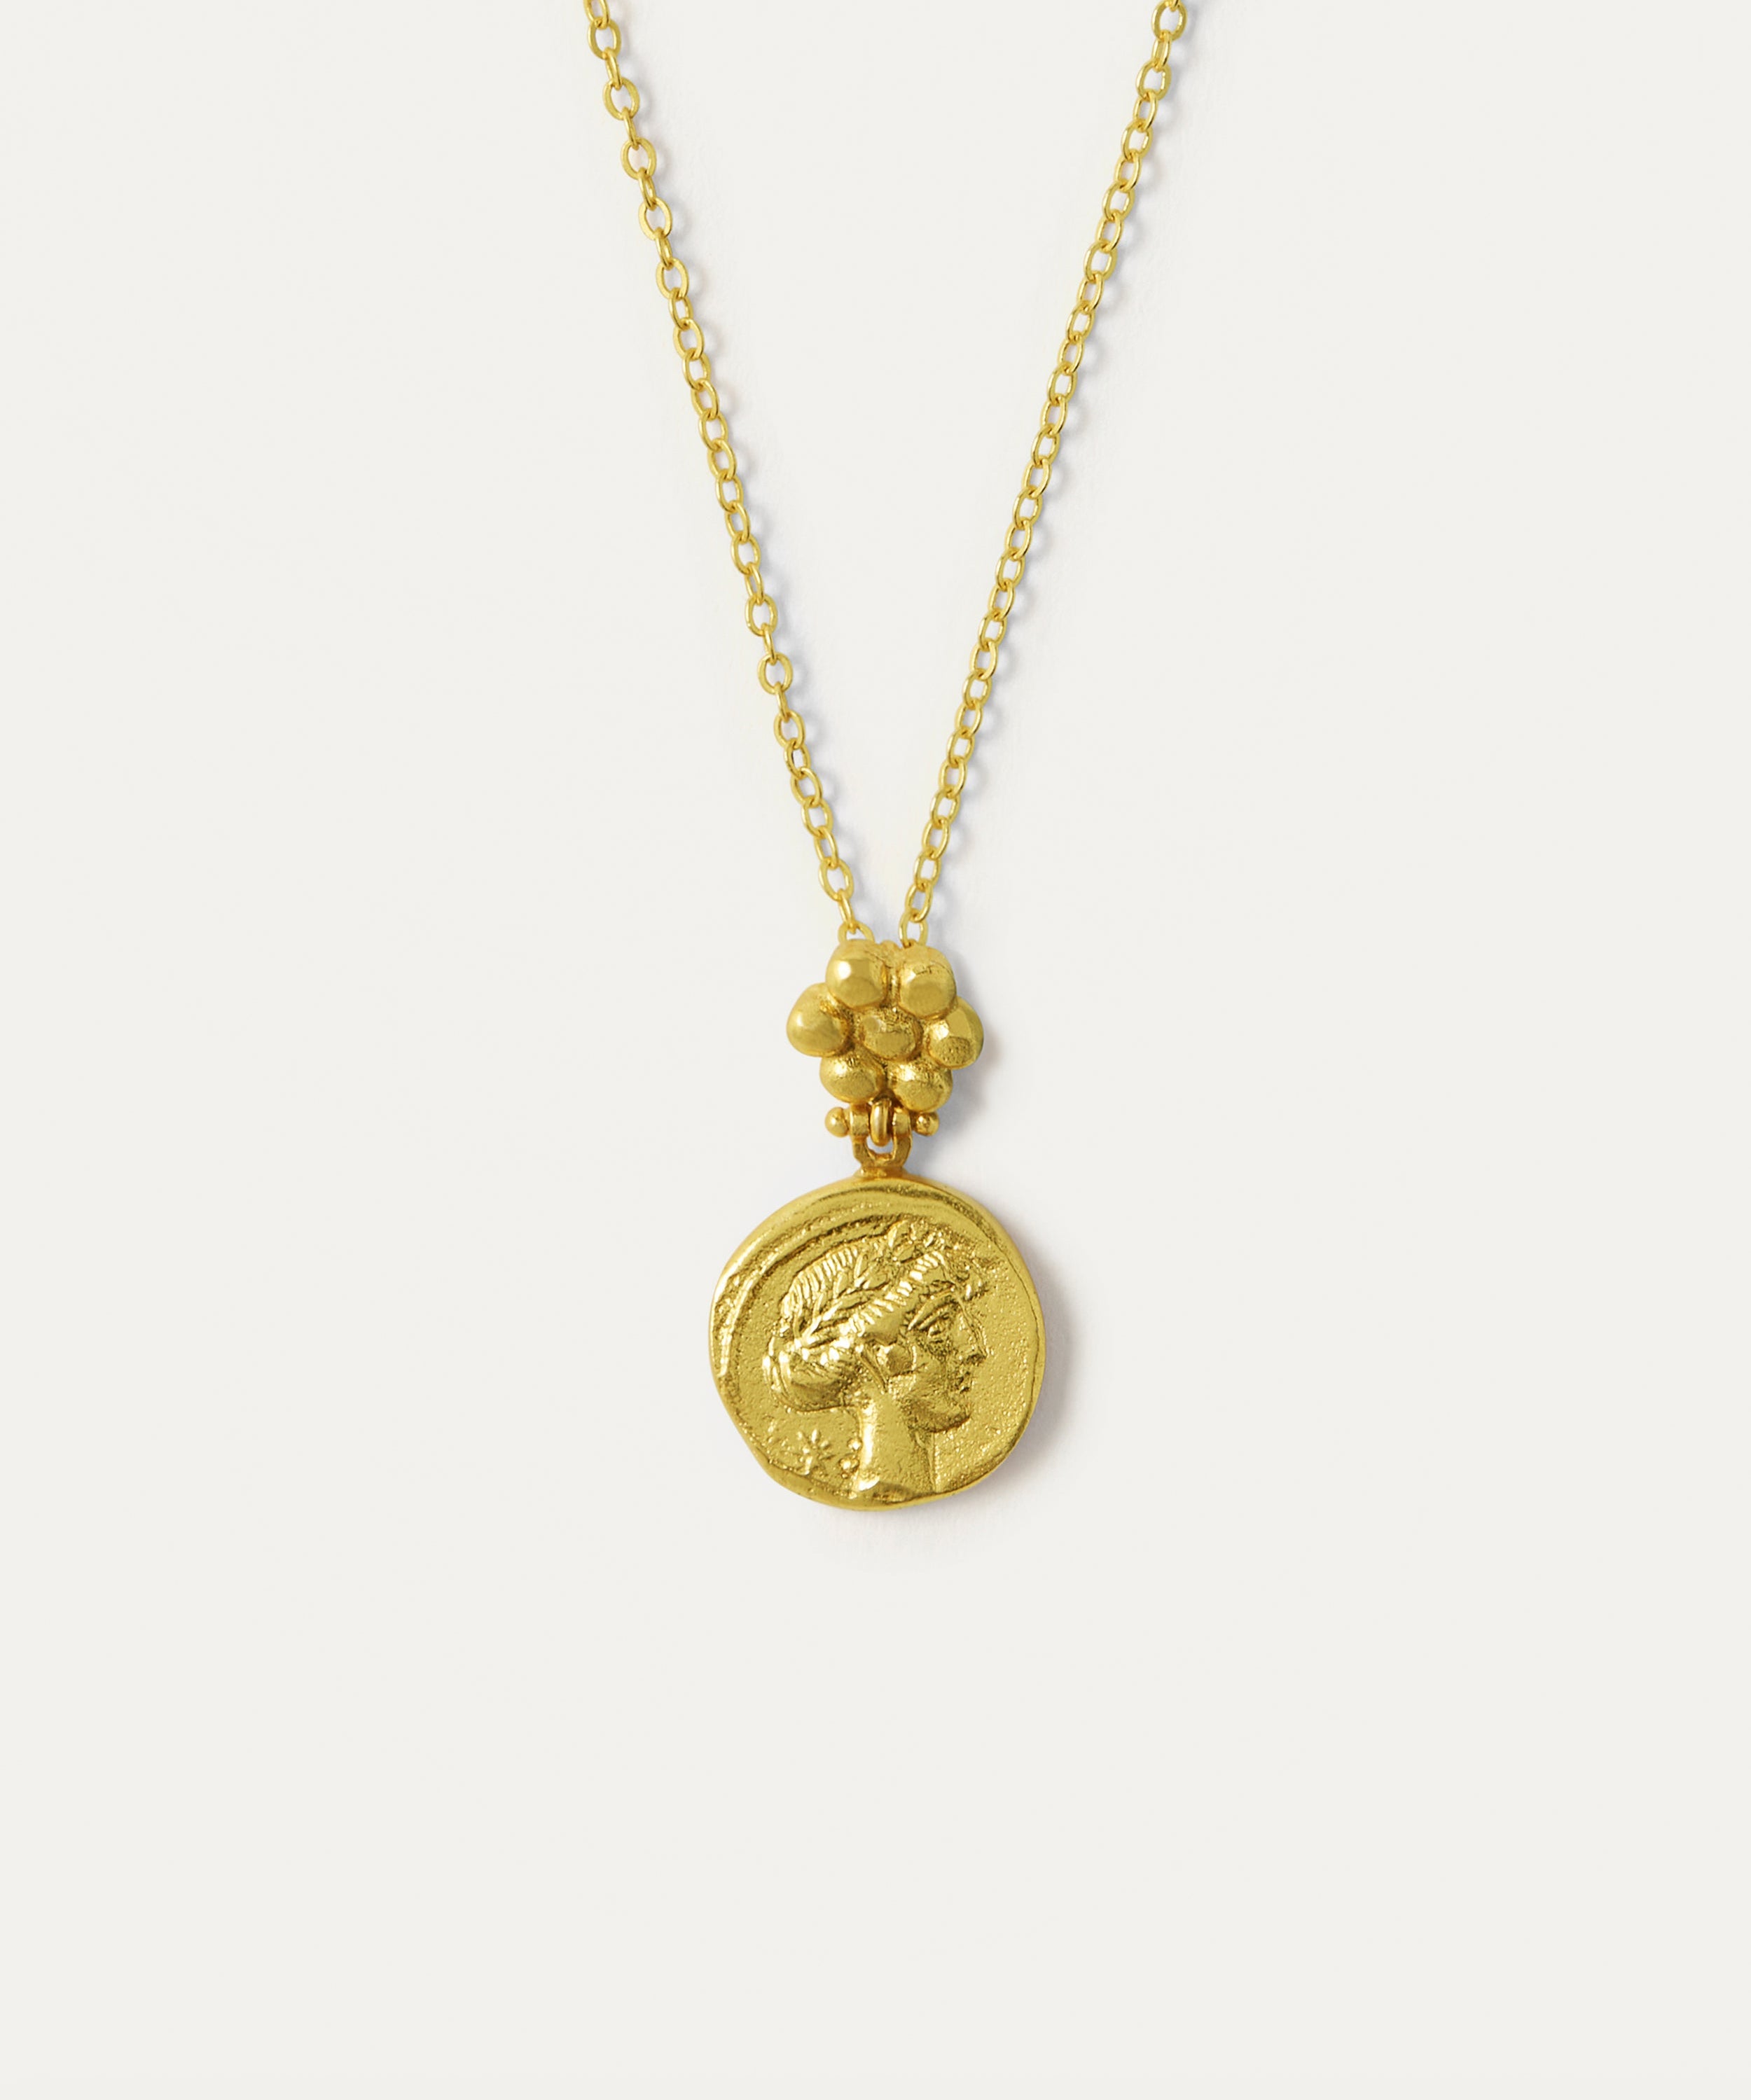 Goddess Demeter Coin Pendant Necklace | Sustainable Jewellery by Ottoman Hands